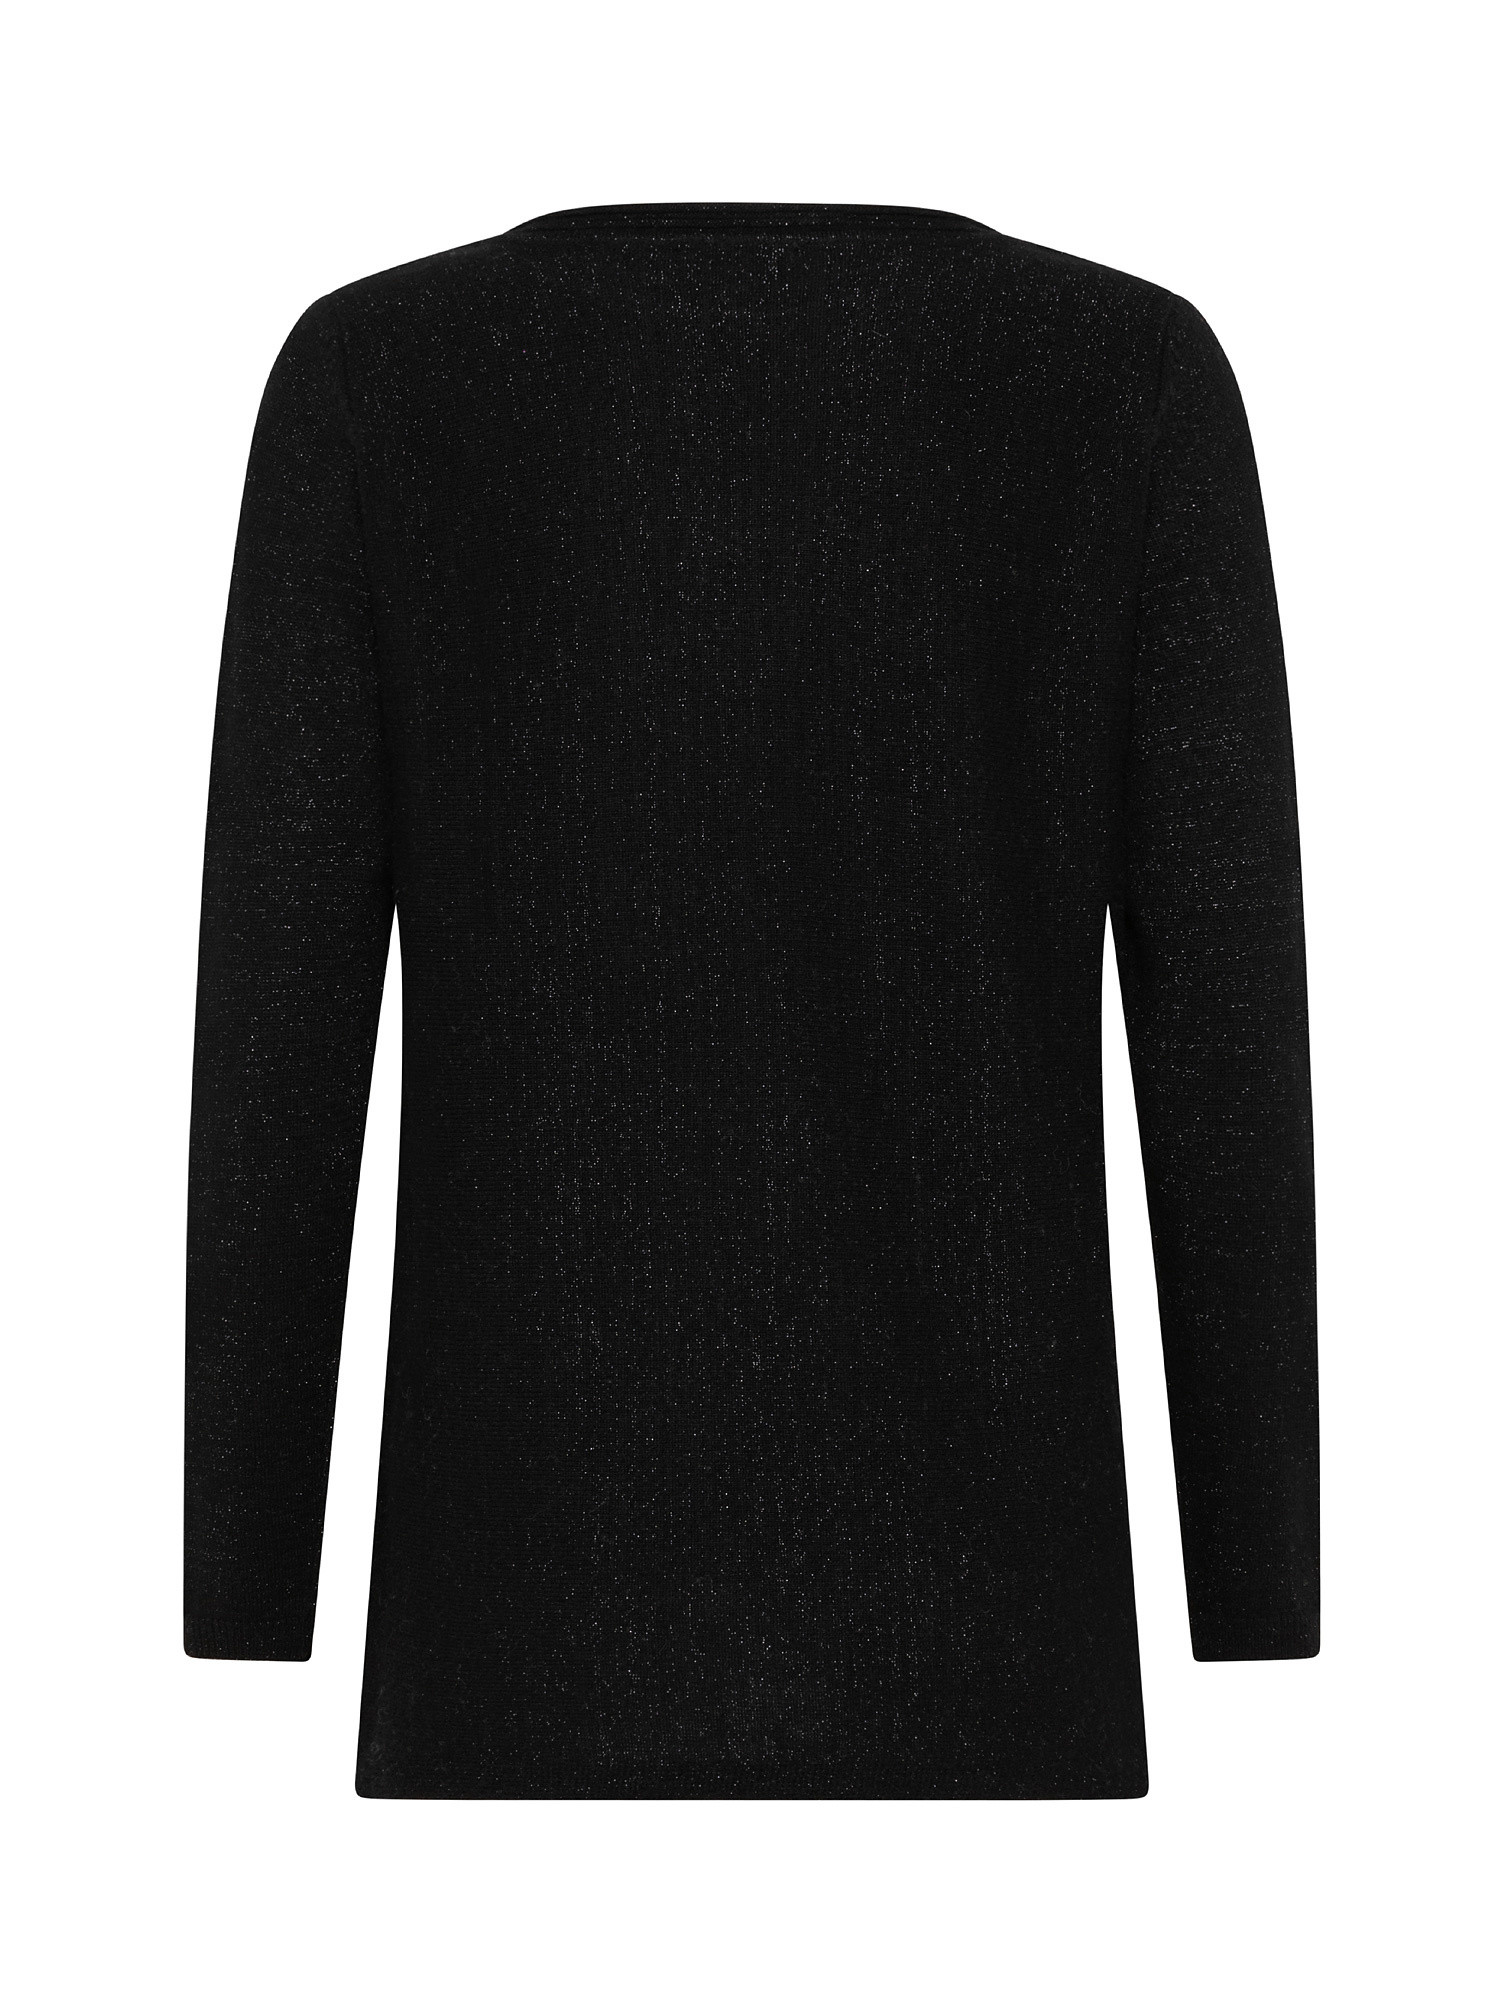 Pullover with pattern, Black, large image number 1